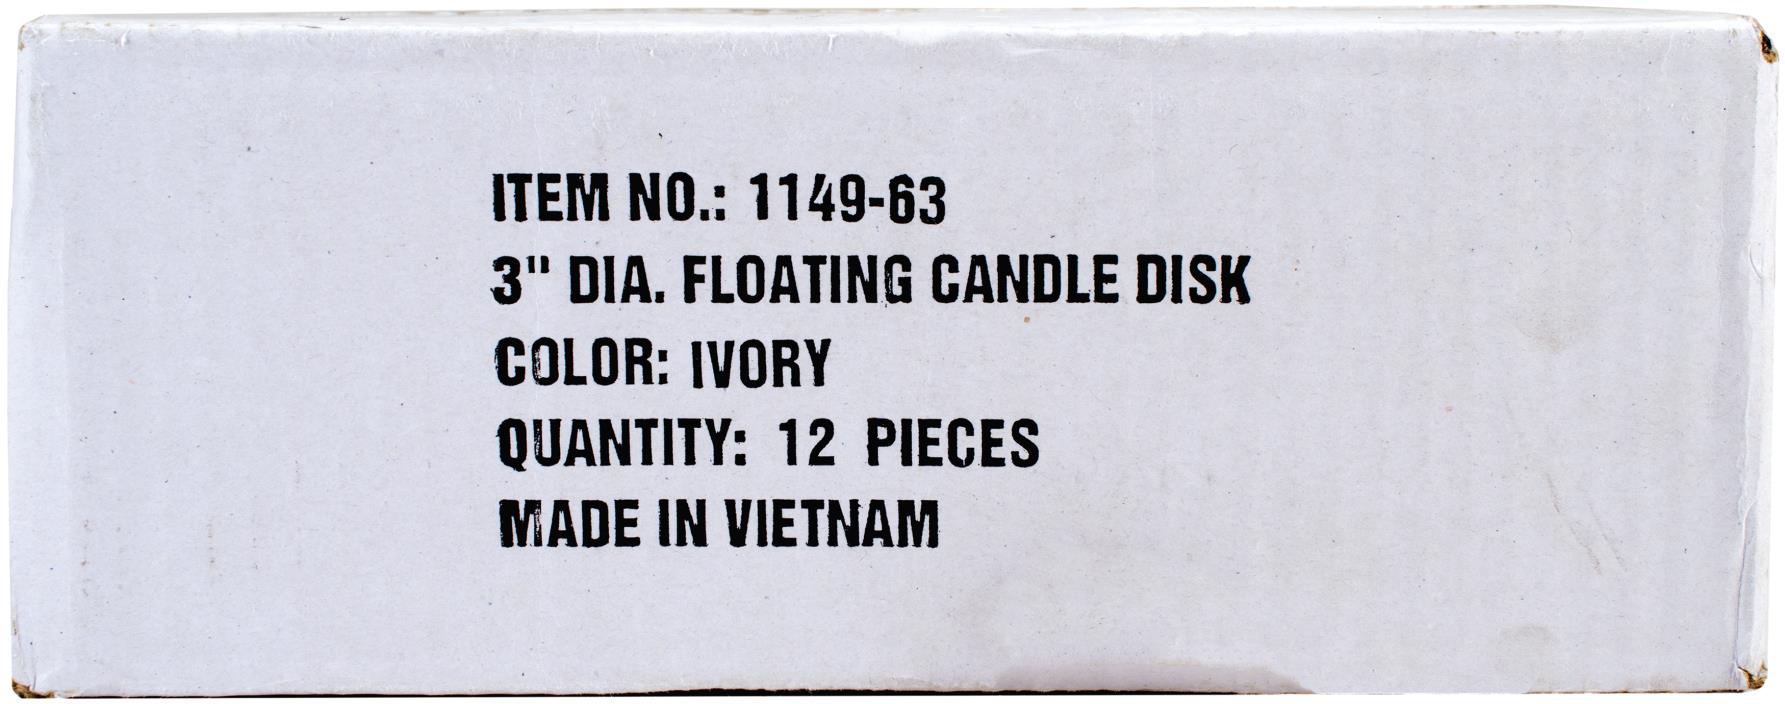 Unscented Floating Candle Disk 3